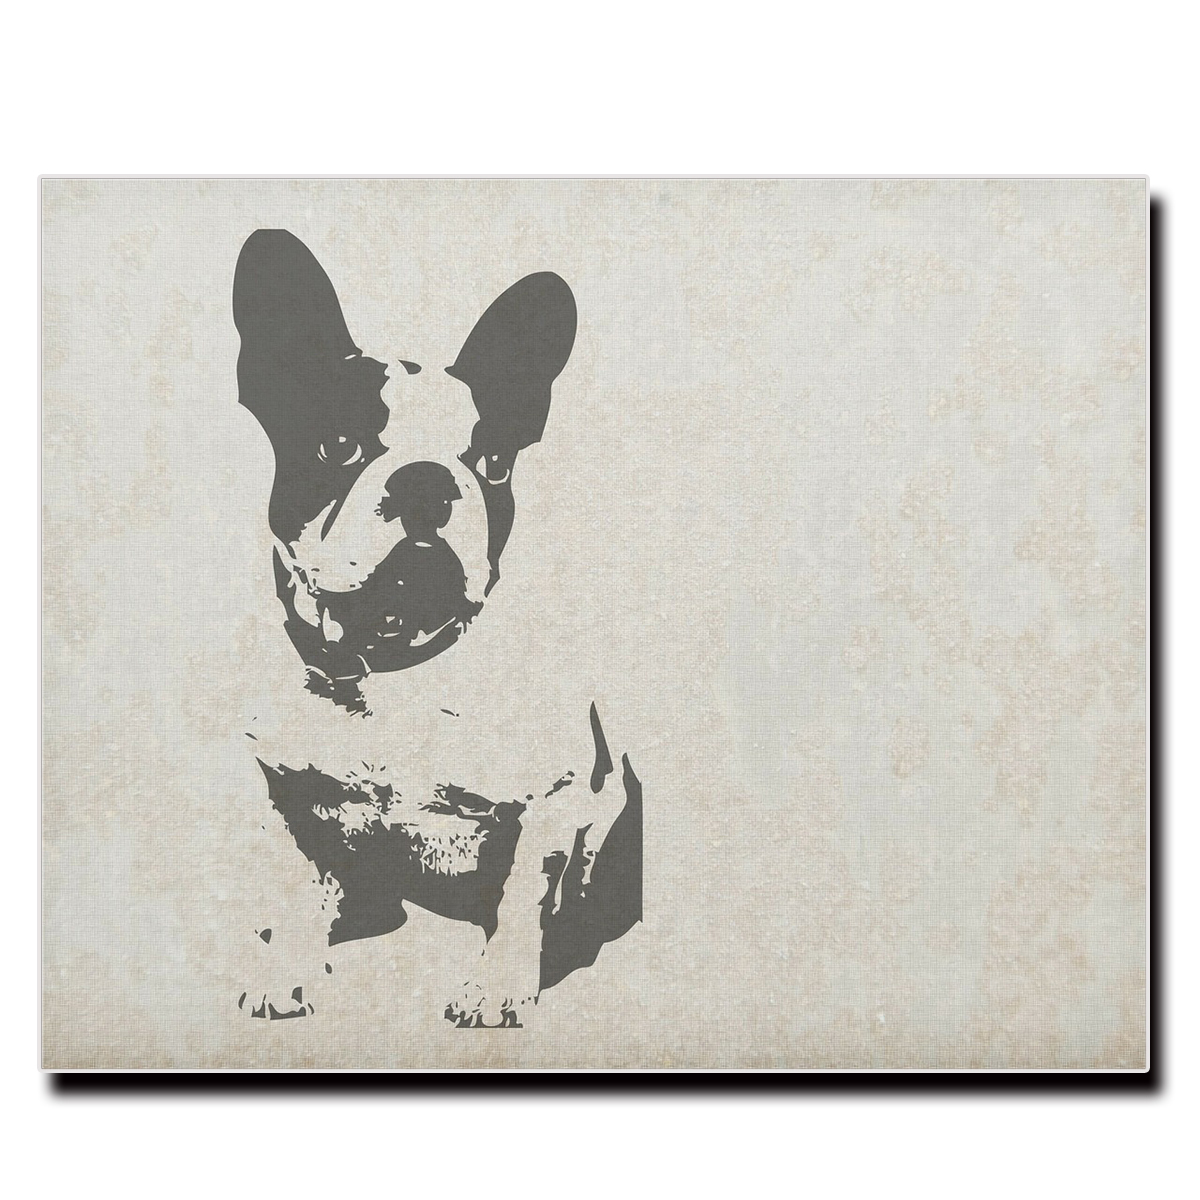  fabric wall art canvas panel picture name . poster picture frame interior Pug French bru dog French Bull dogbsa leather stylish lovely 